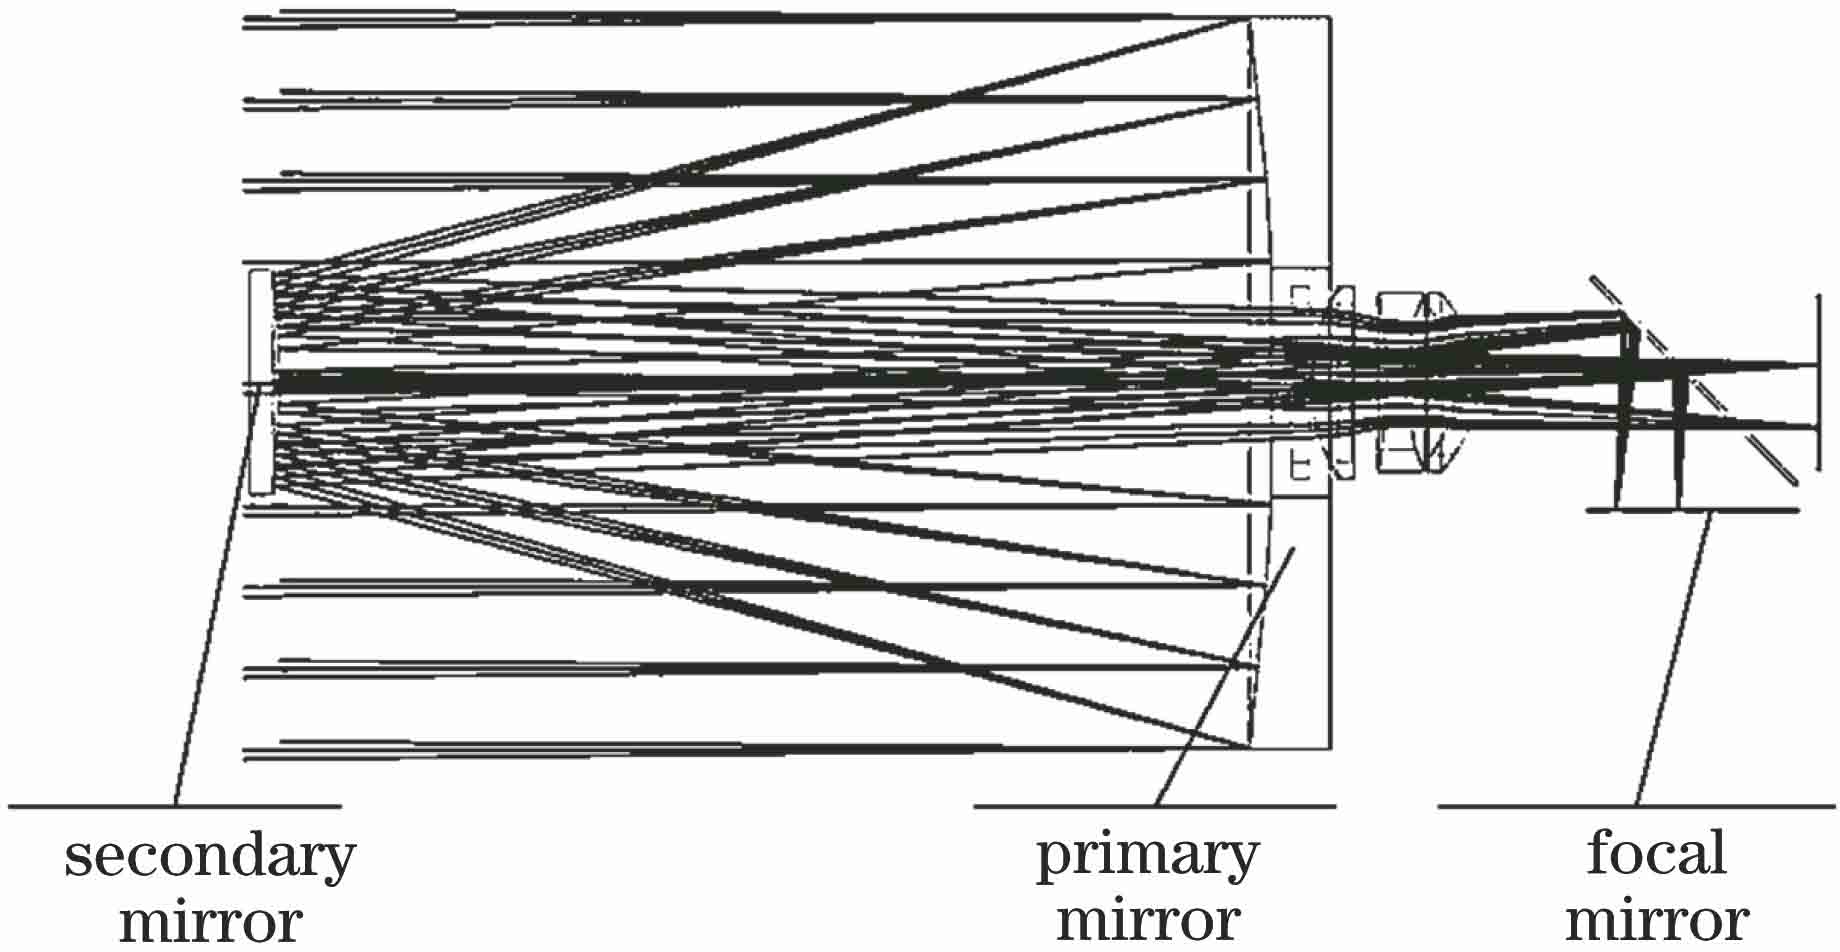 Schematic of positional relationship between primary and secondary mirrors